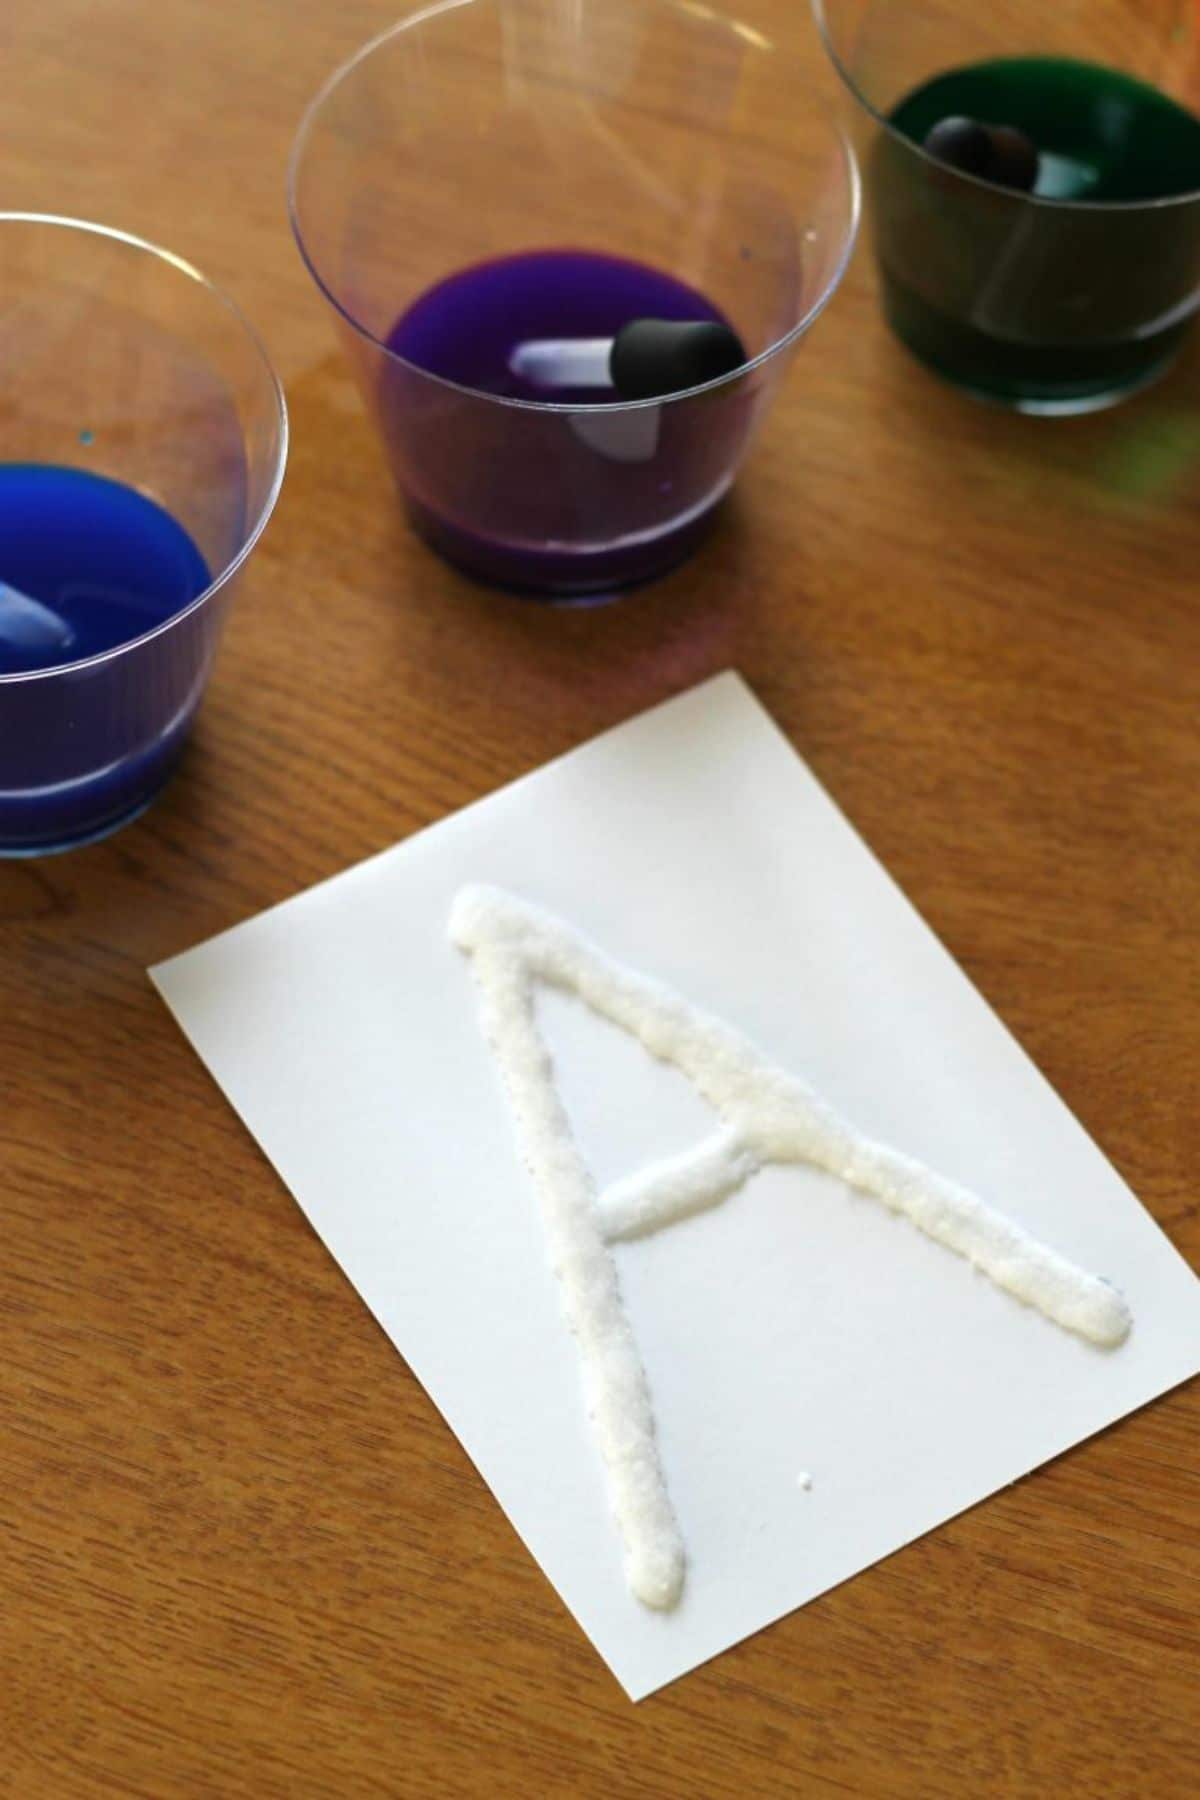 on a table is a sheet of paper with an "A" written in salt. Behind the sheet are 3 glasses filled with coloured water